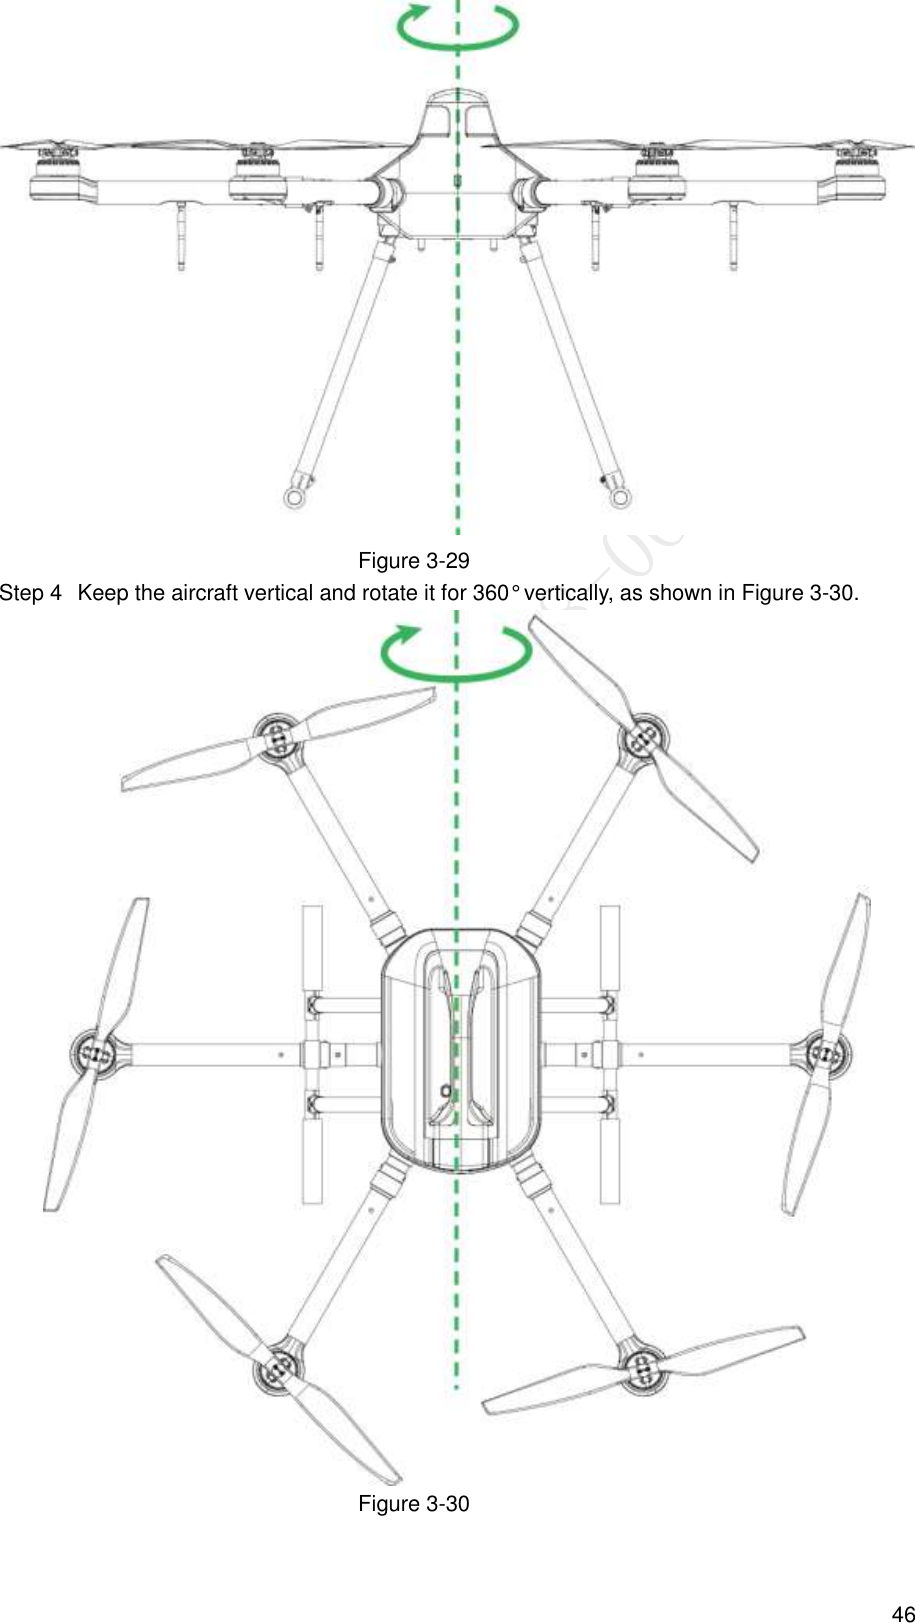  46  Figure 3-29   Keep the aircraft vertical and rotate it for 360° vertically, as shown in Figure 3-30. Step 4 Figure 3-30 